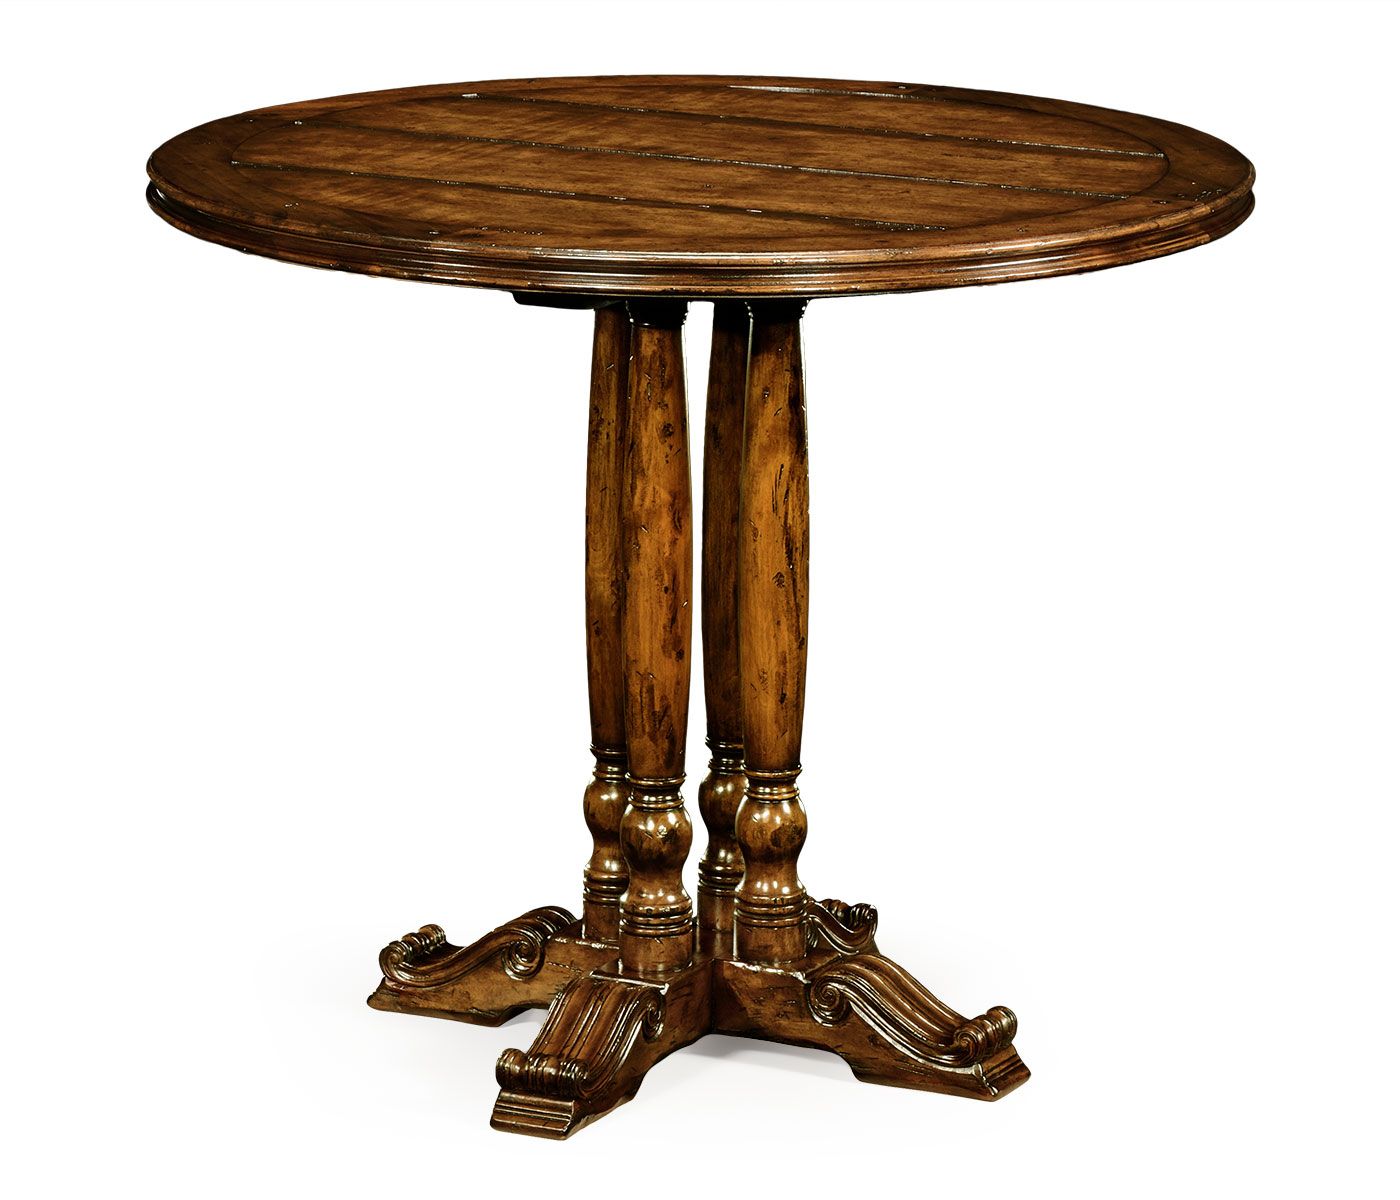 36" French Round Country Dining Table Throughout Most Current Montauk 36'' Dining Tables (View 7 of 15)